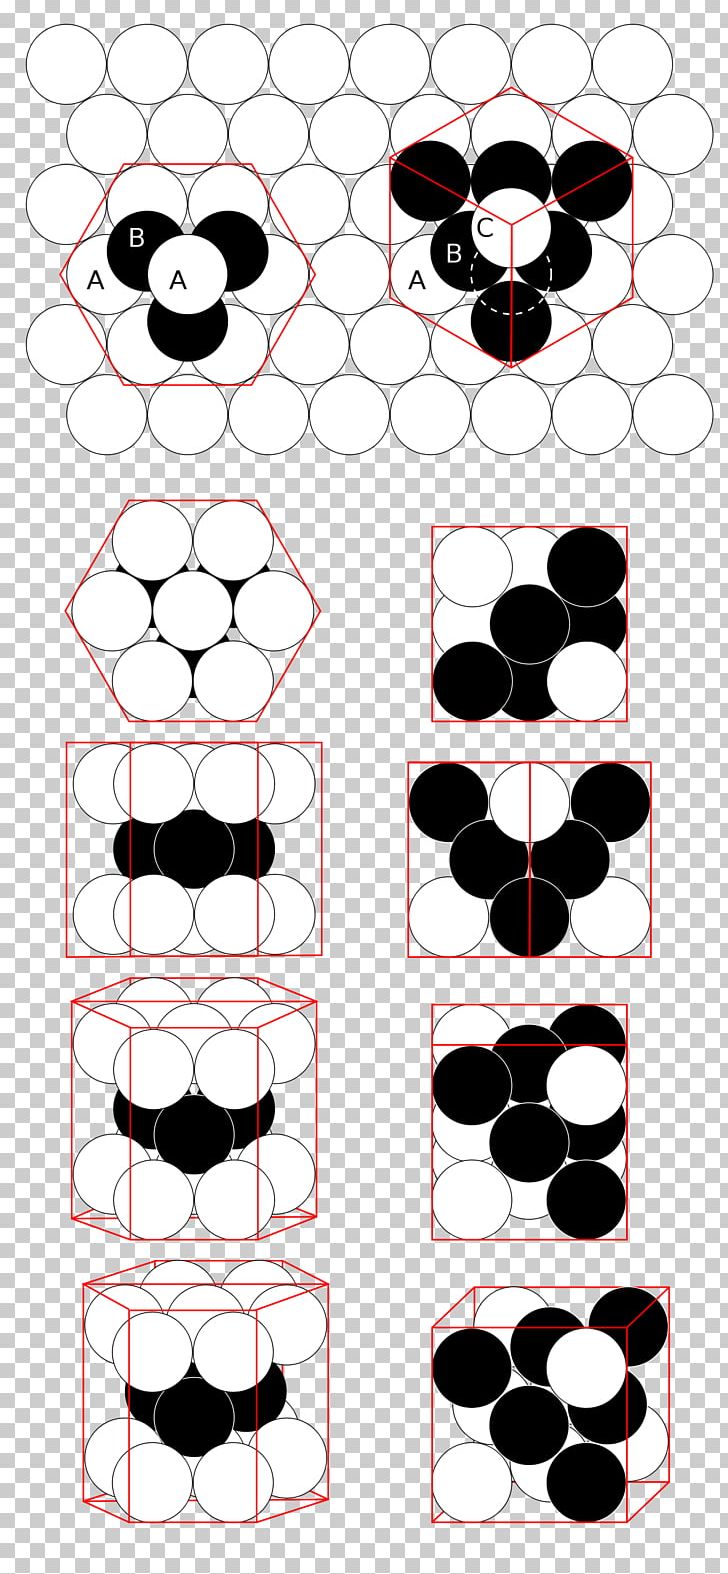 Close-packing Of Equal Spheres Sphere Packing Packing Problems Atomic Packing Factor PNG, Clipart, Area, Atom, Atomic Packing Factor, Black And White, Carl Friedrich Gauss Free PNG Download